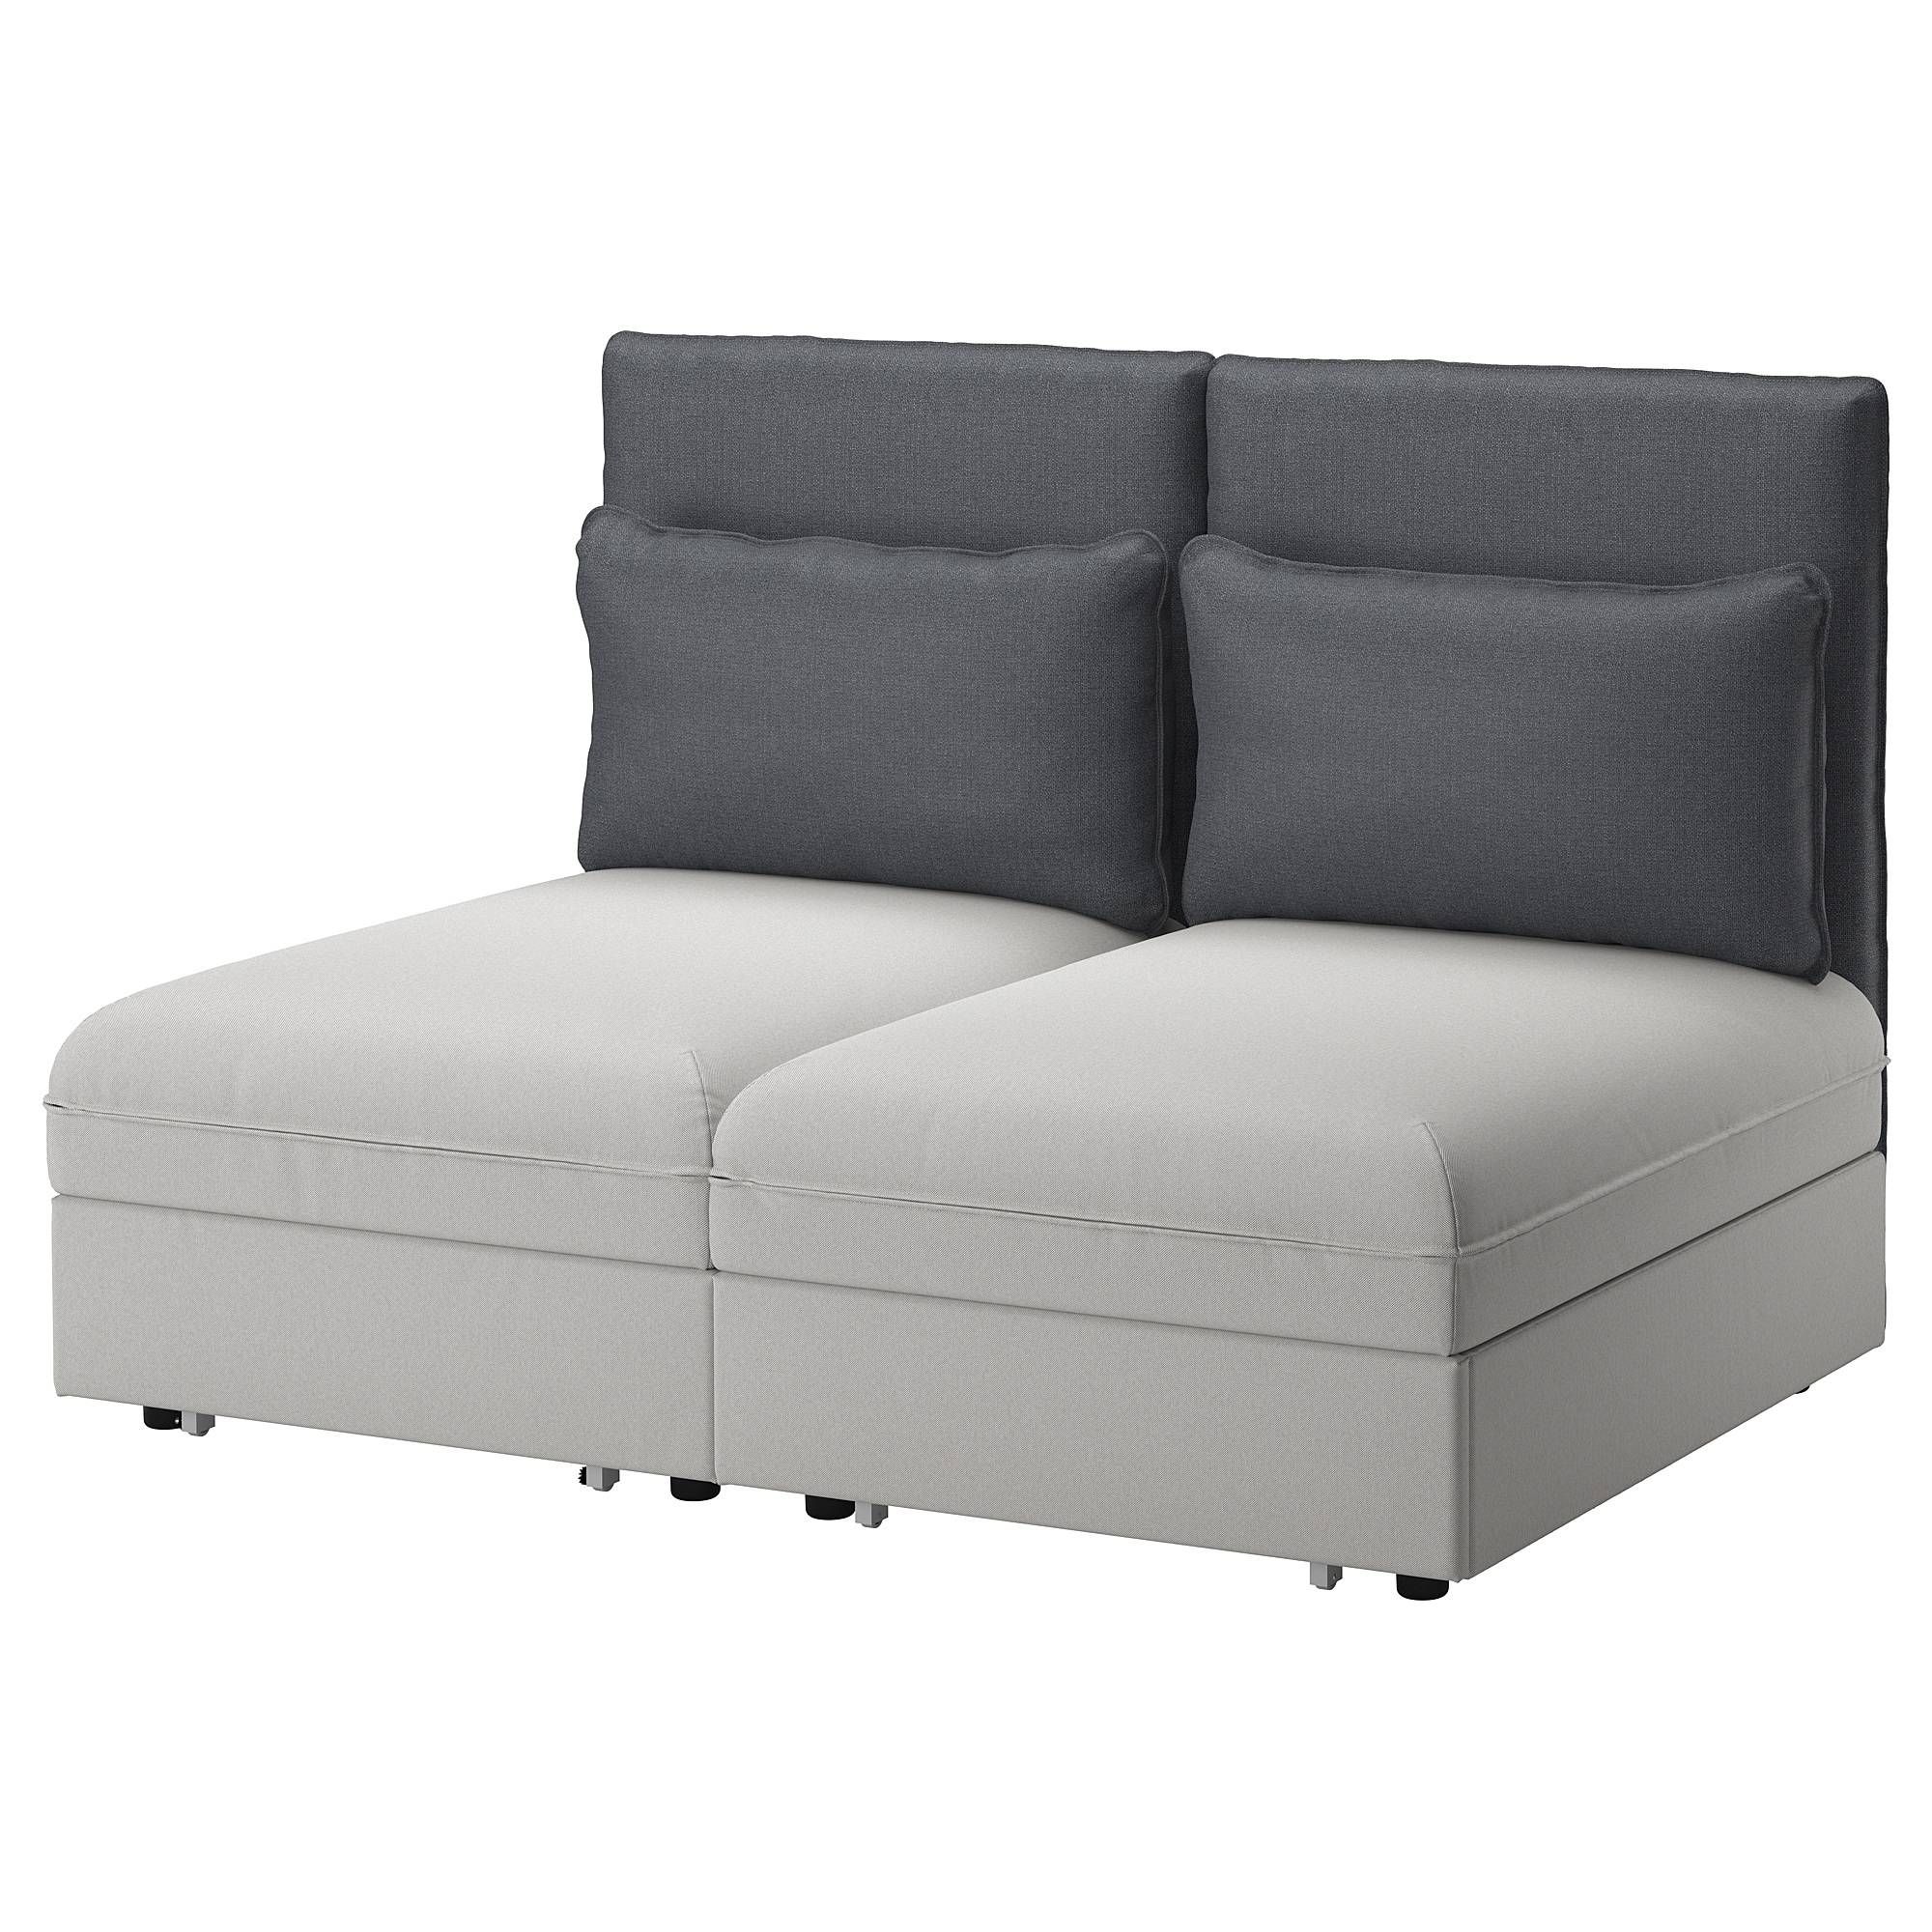 Sleeper Sofas & Chair Beds – Ikea With Manstad Sofa Bed Ikea (View 16 of 25)